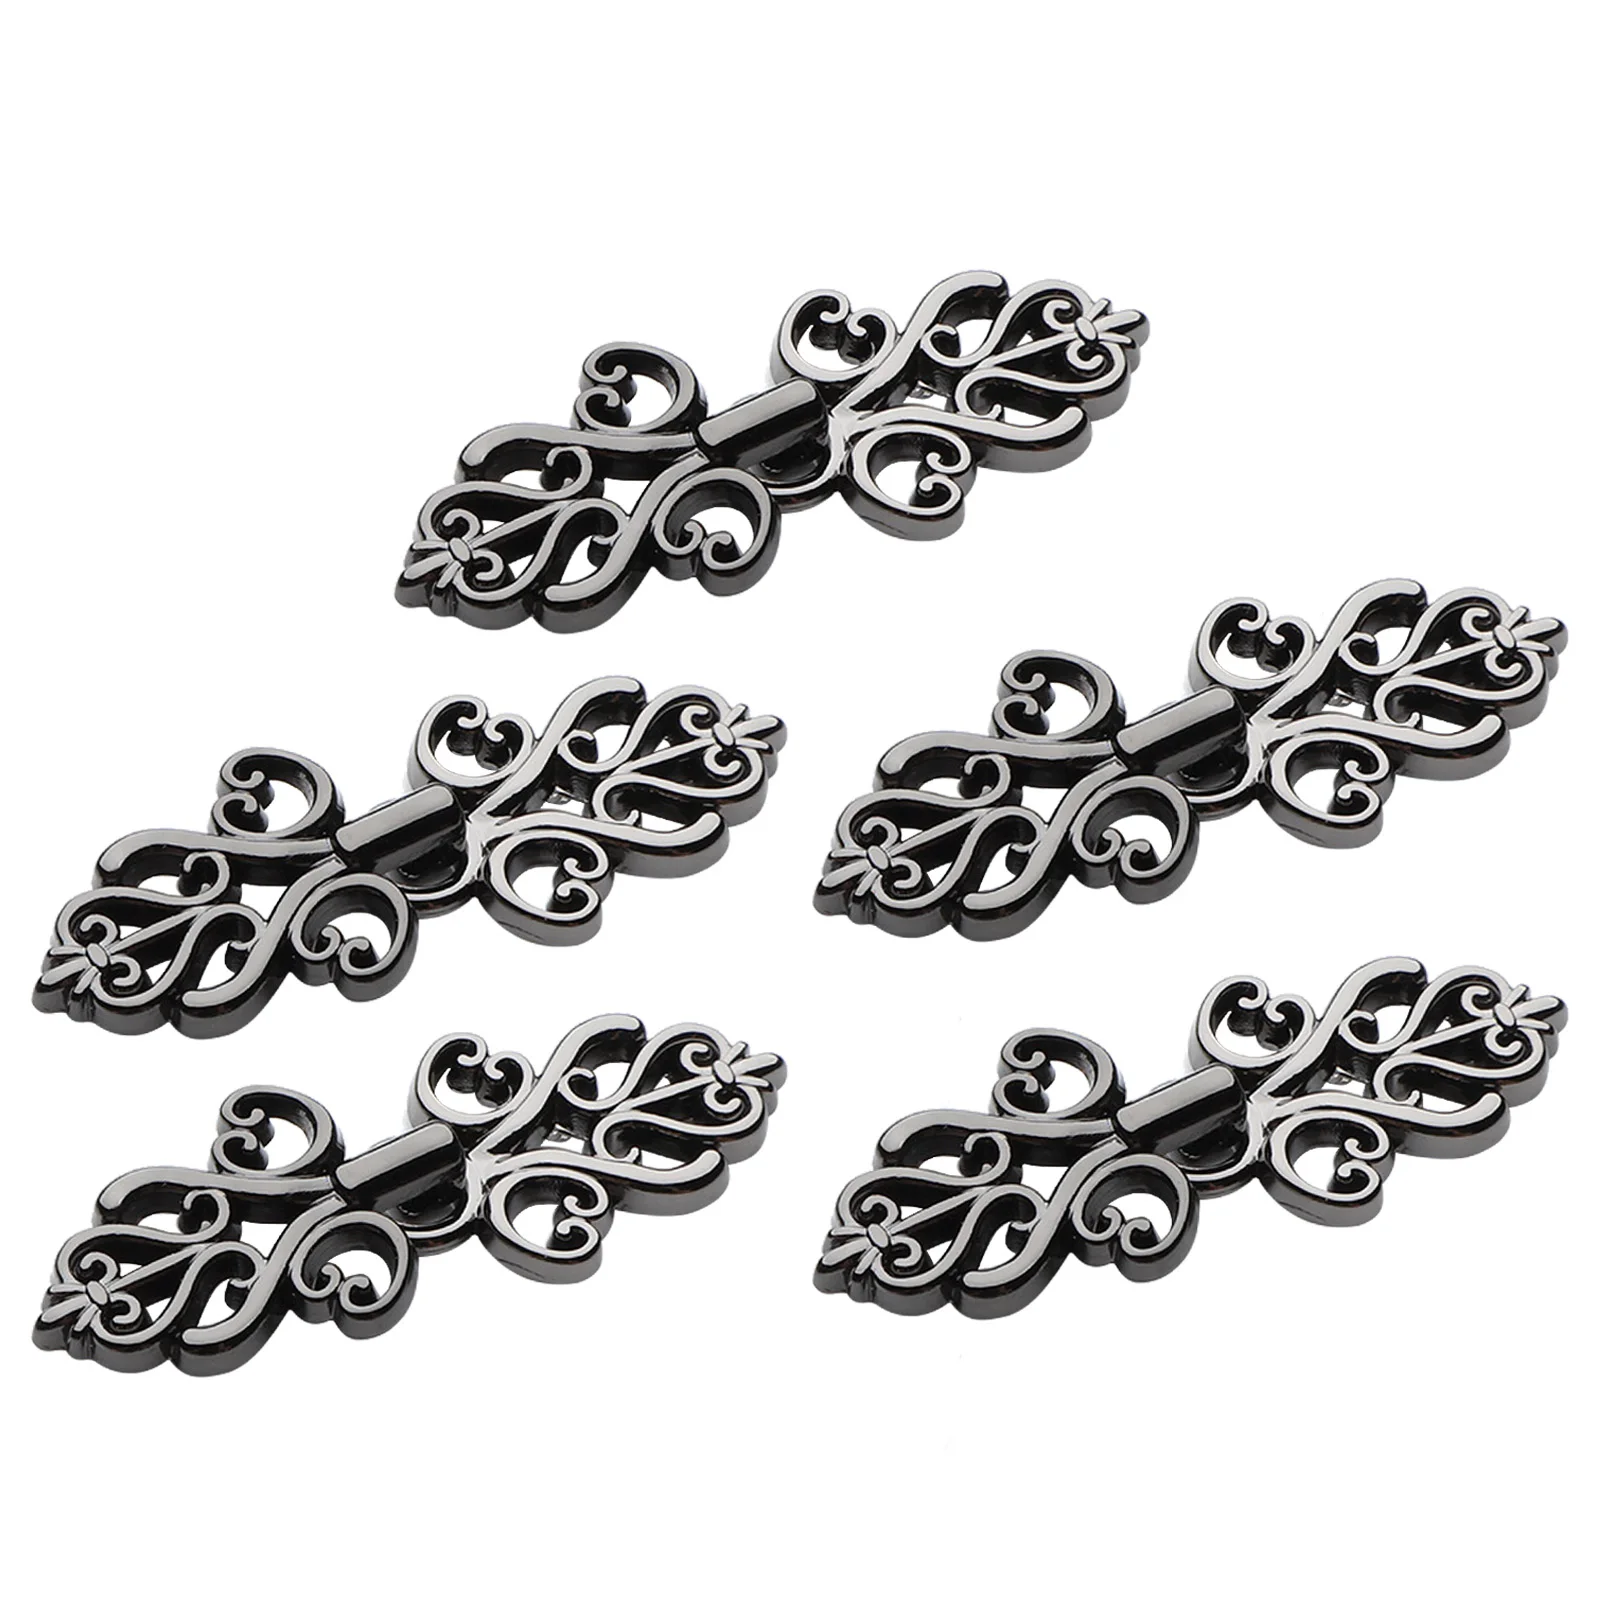 5 Pair Metal Hook and Eyes Clasps Swirl Clips Vintage Frog-Button